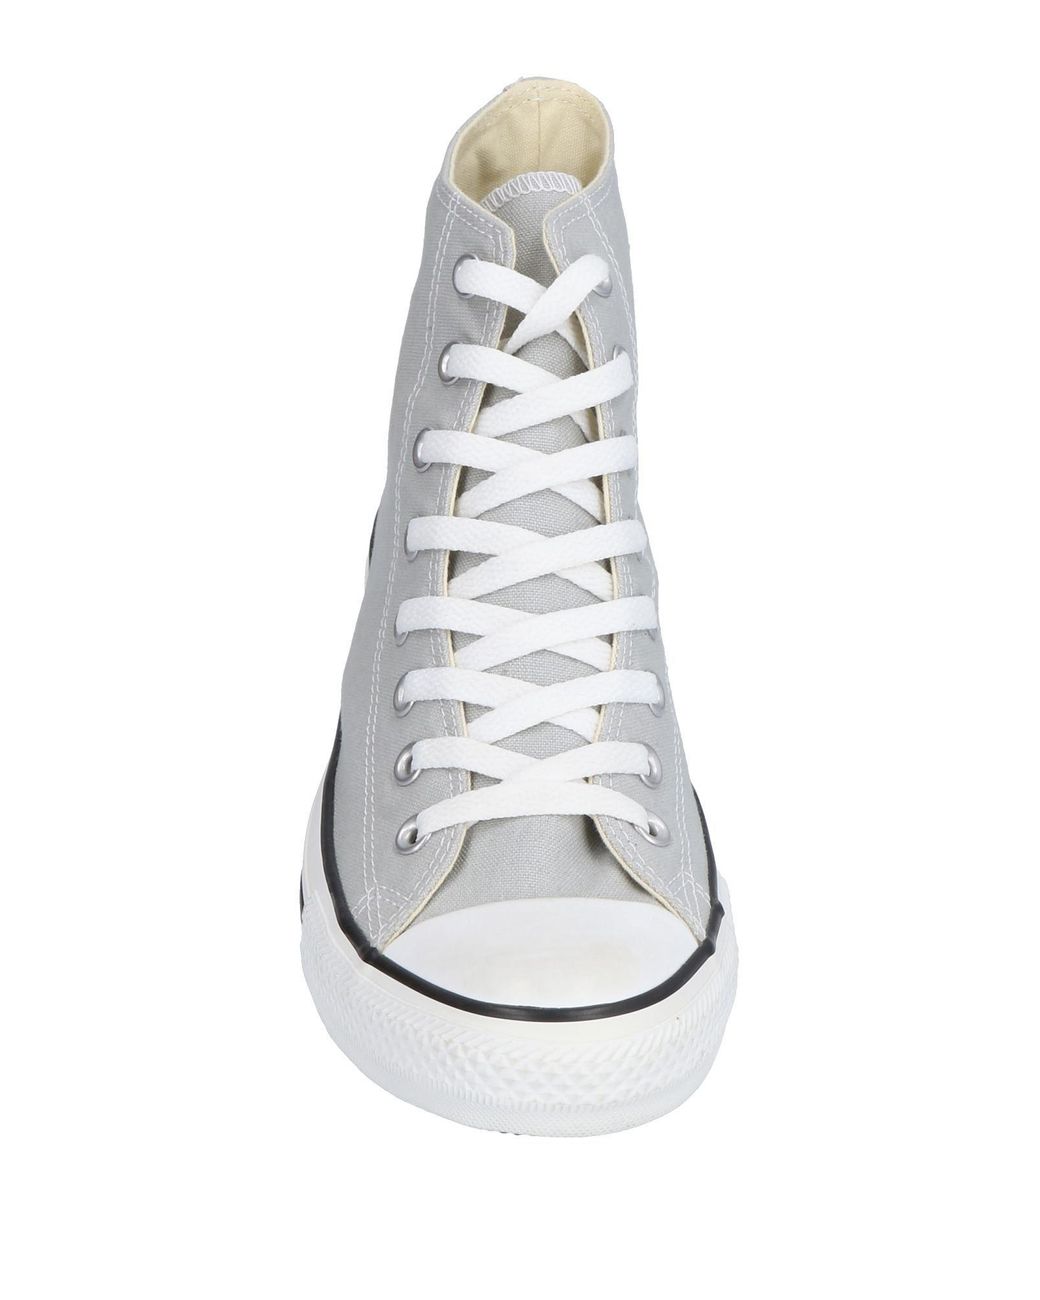 Obsession did it Sleet Converse High-tops & Sneakers in Grey for Men | Lyst Australia